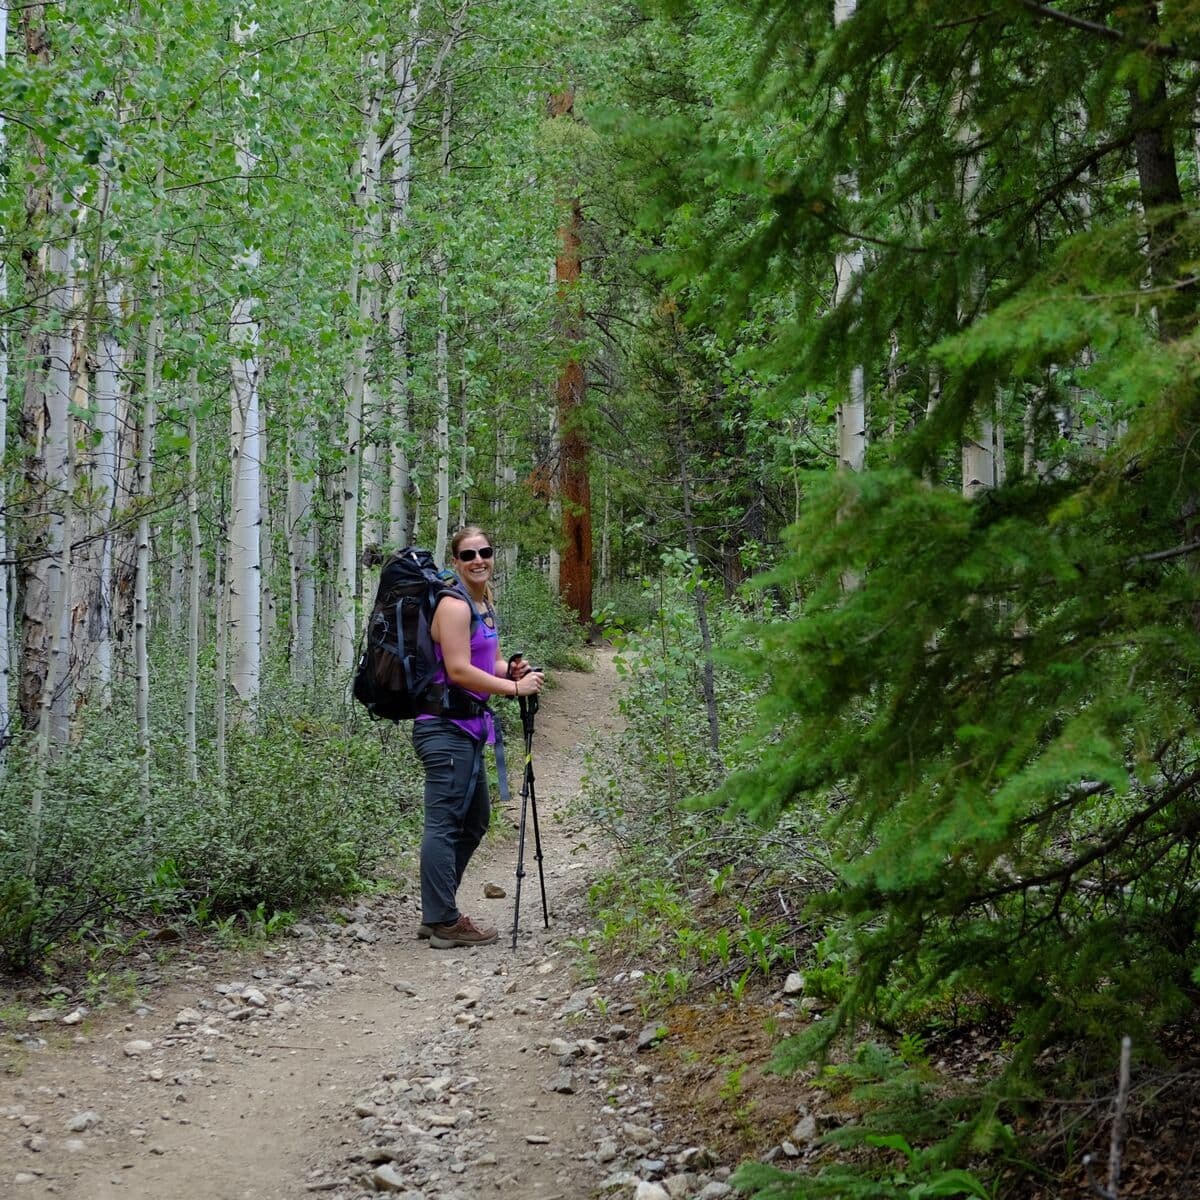 The trail starts off with a lovely trek through an aspen grove.